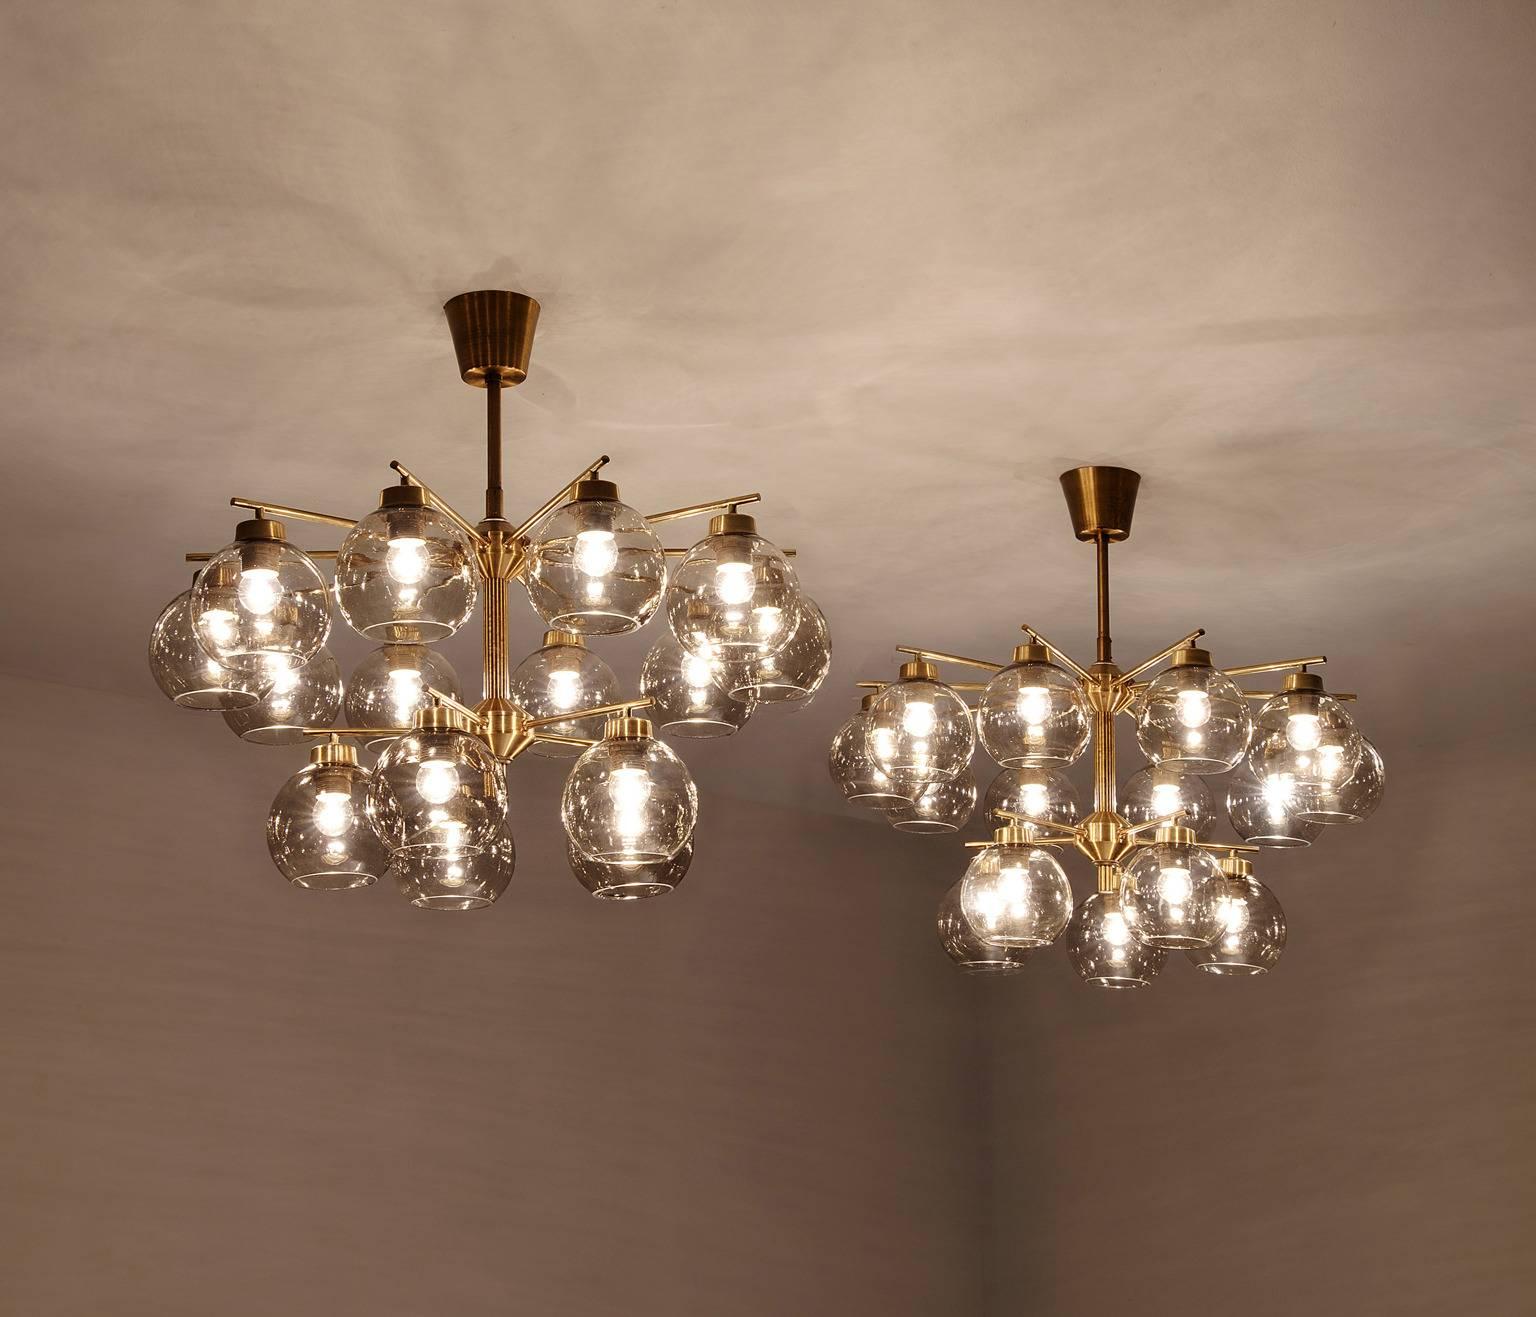 Chandeliers, in brass and glass, by Hans-Agne Jakobsson for AB Markaryd, Sweden 1960s.

Swedish brass chandeliers with fifteen brass arms with smoked glass spheres. Divided over two levels, the light created by these chandeliers is very pleasant and